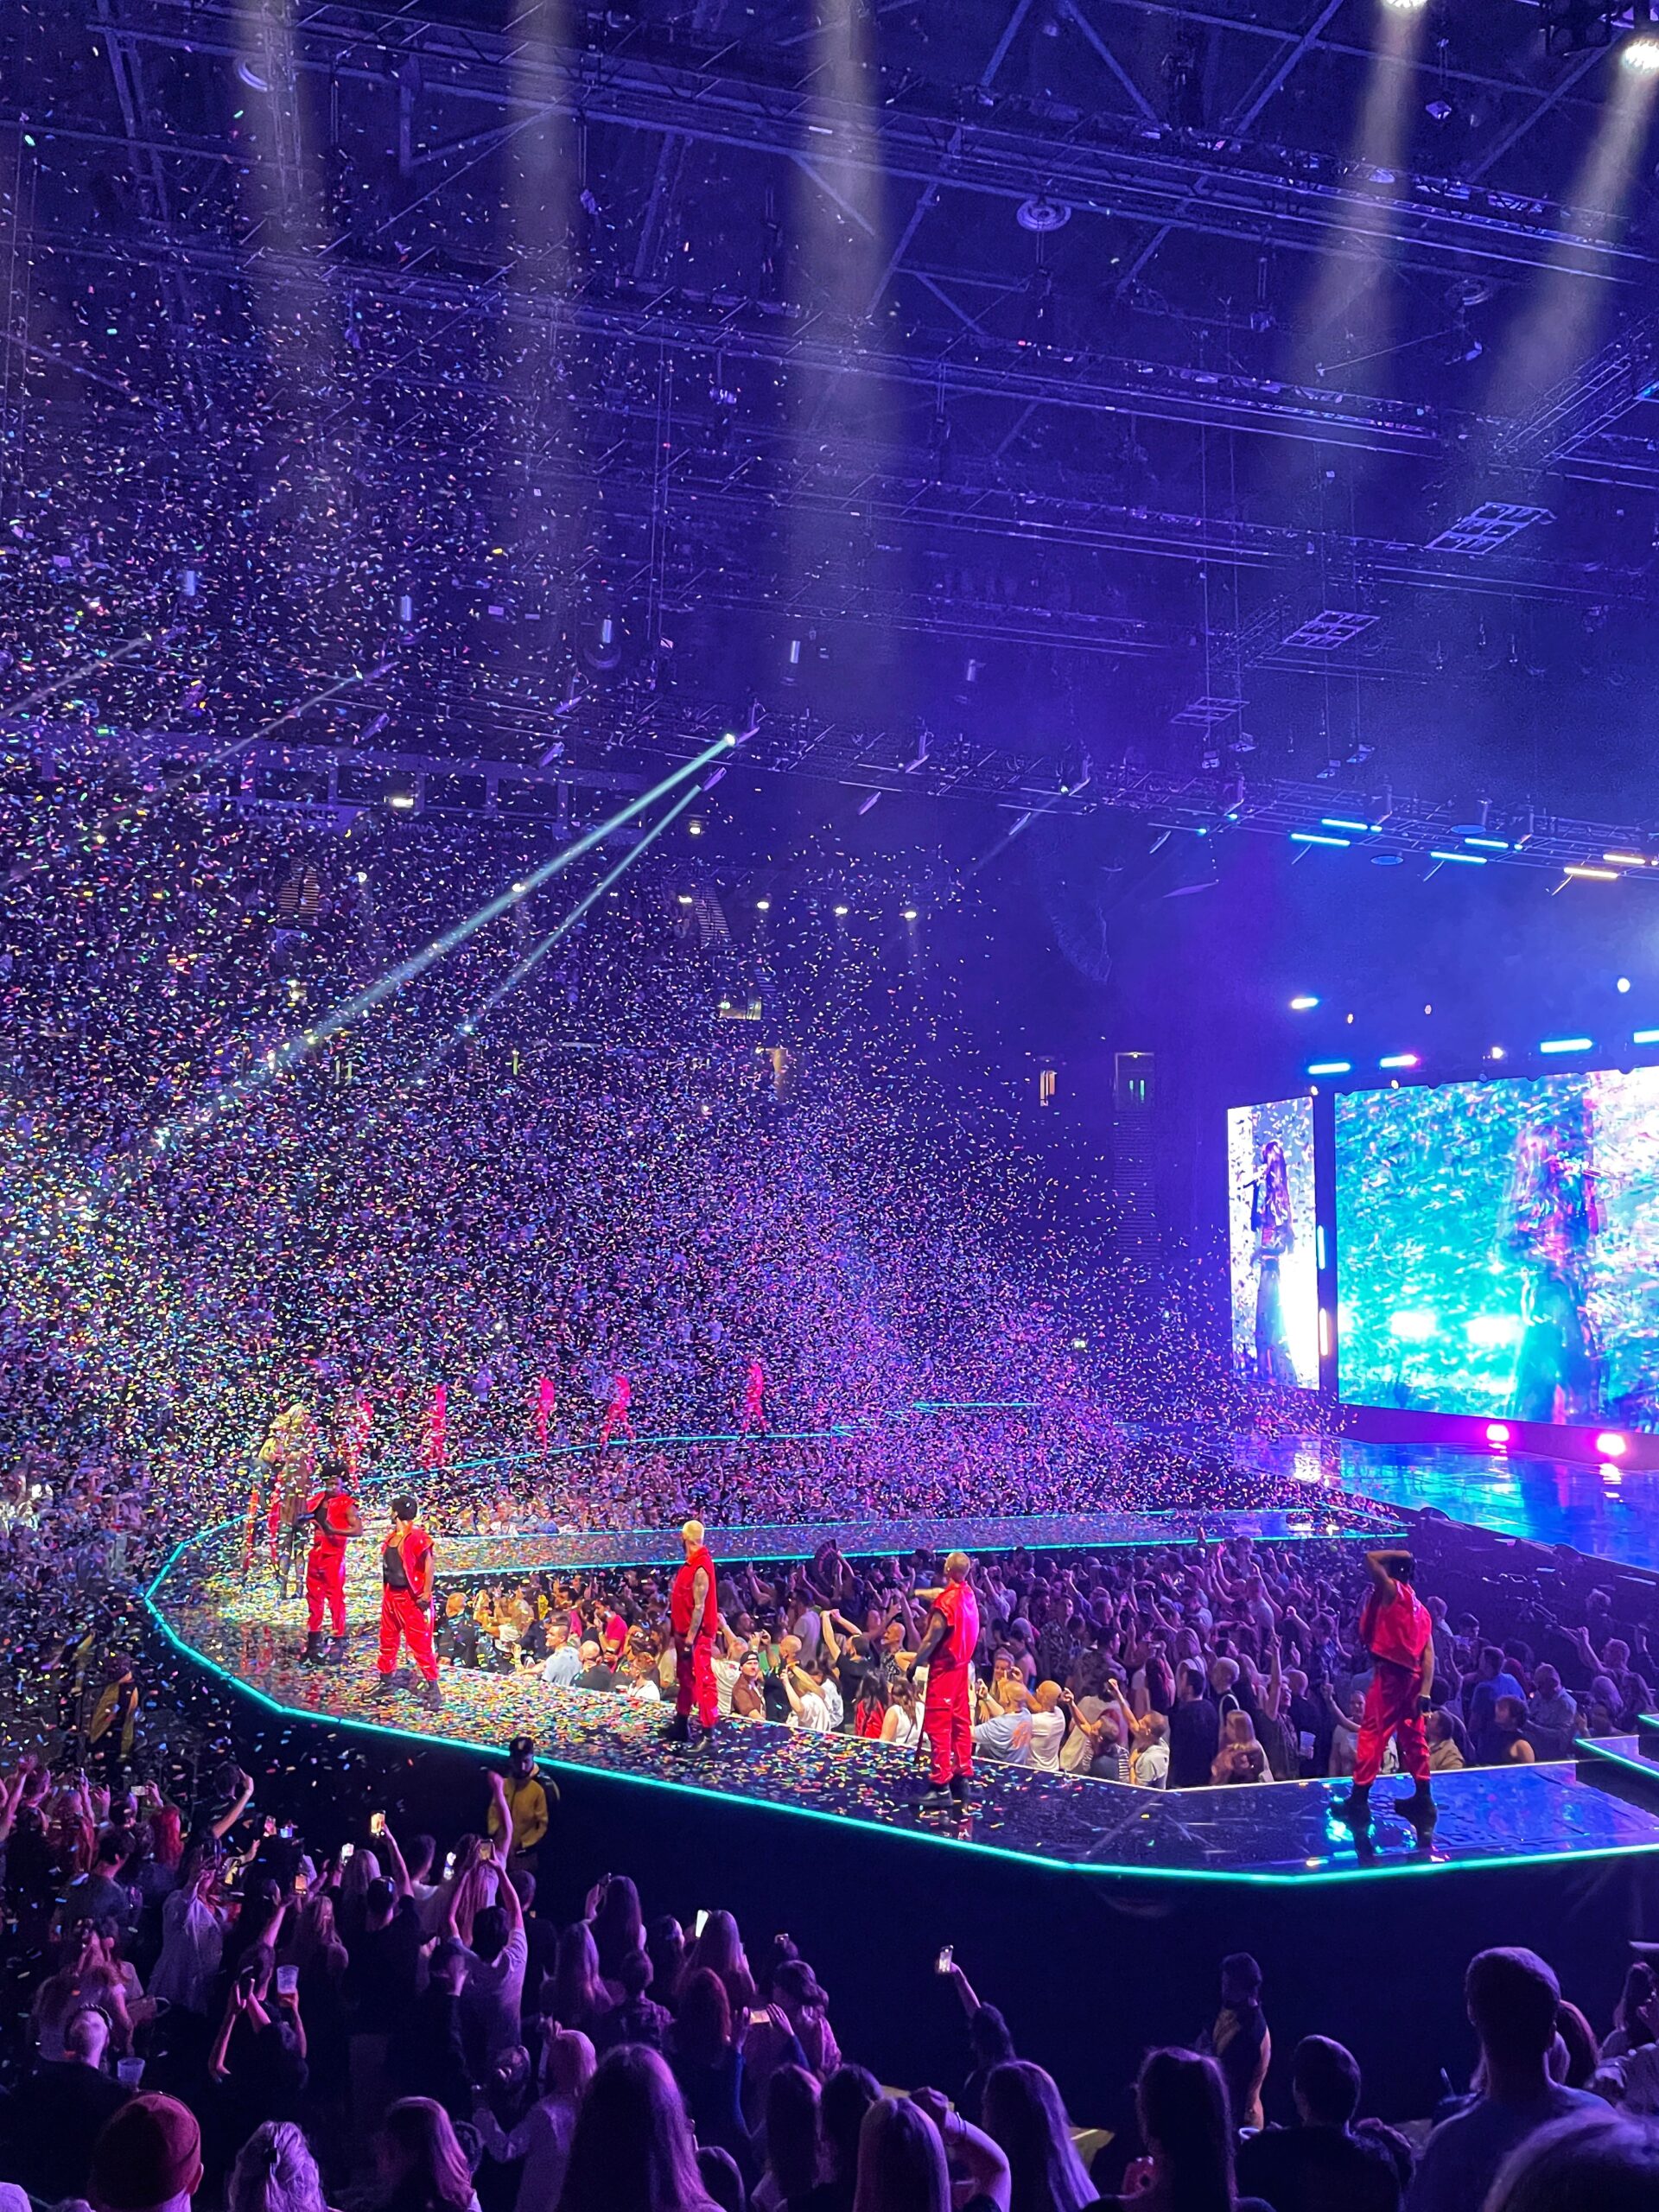 Girls Aloud performing in Manchester at the AO Arena. Credit: The Manc Group